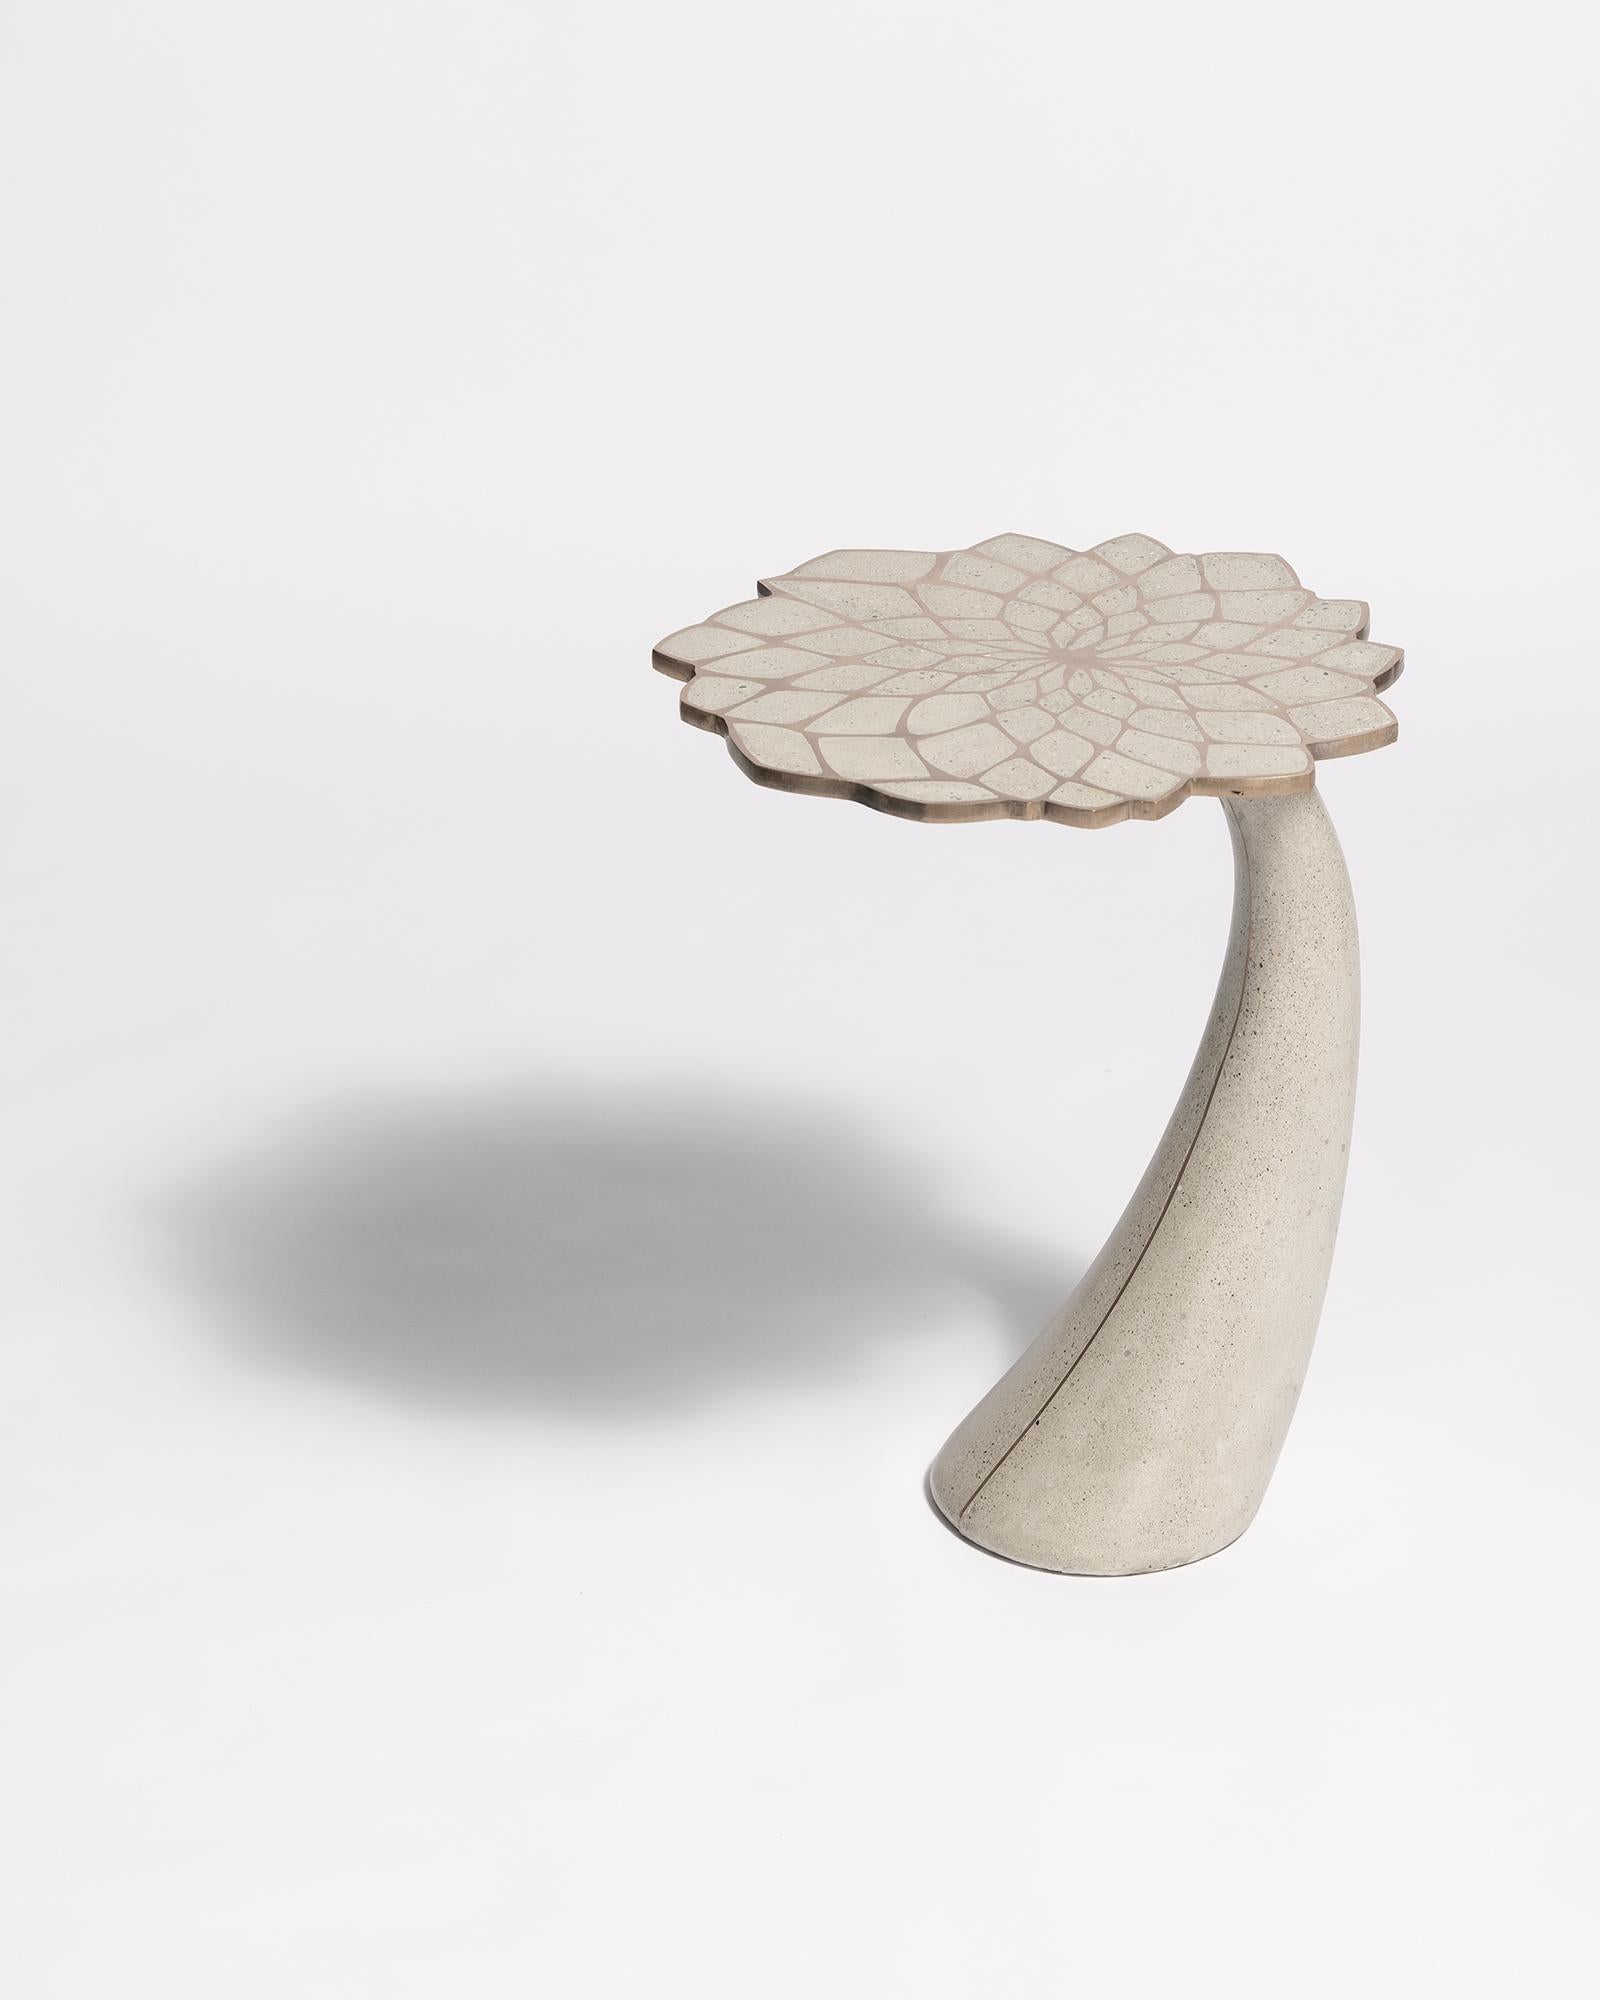 James de Wulf Exo Mosaic Lily Side Table For Sale 1